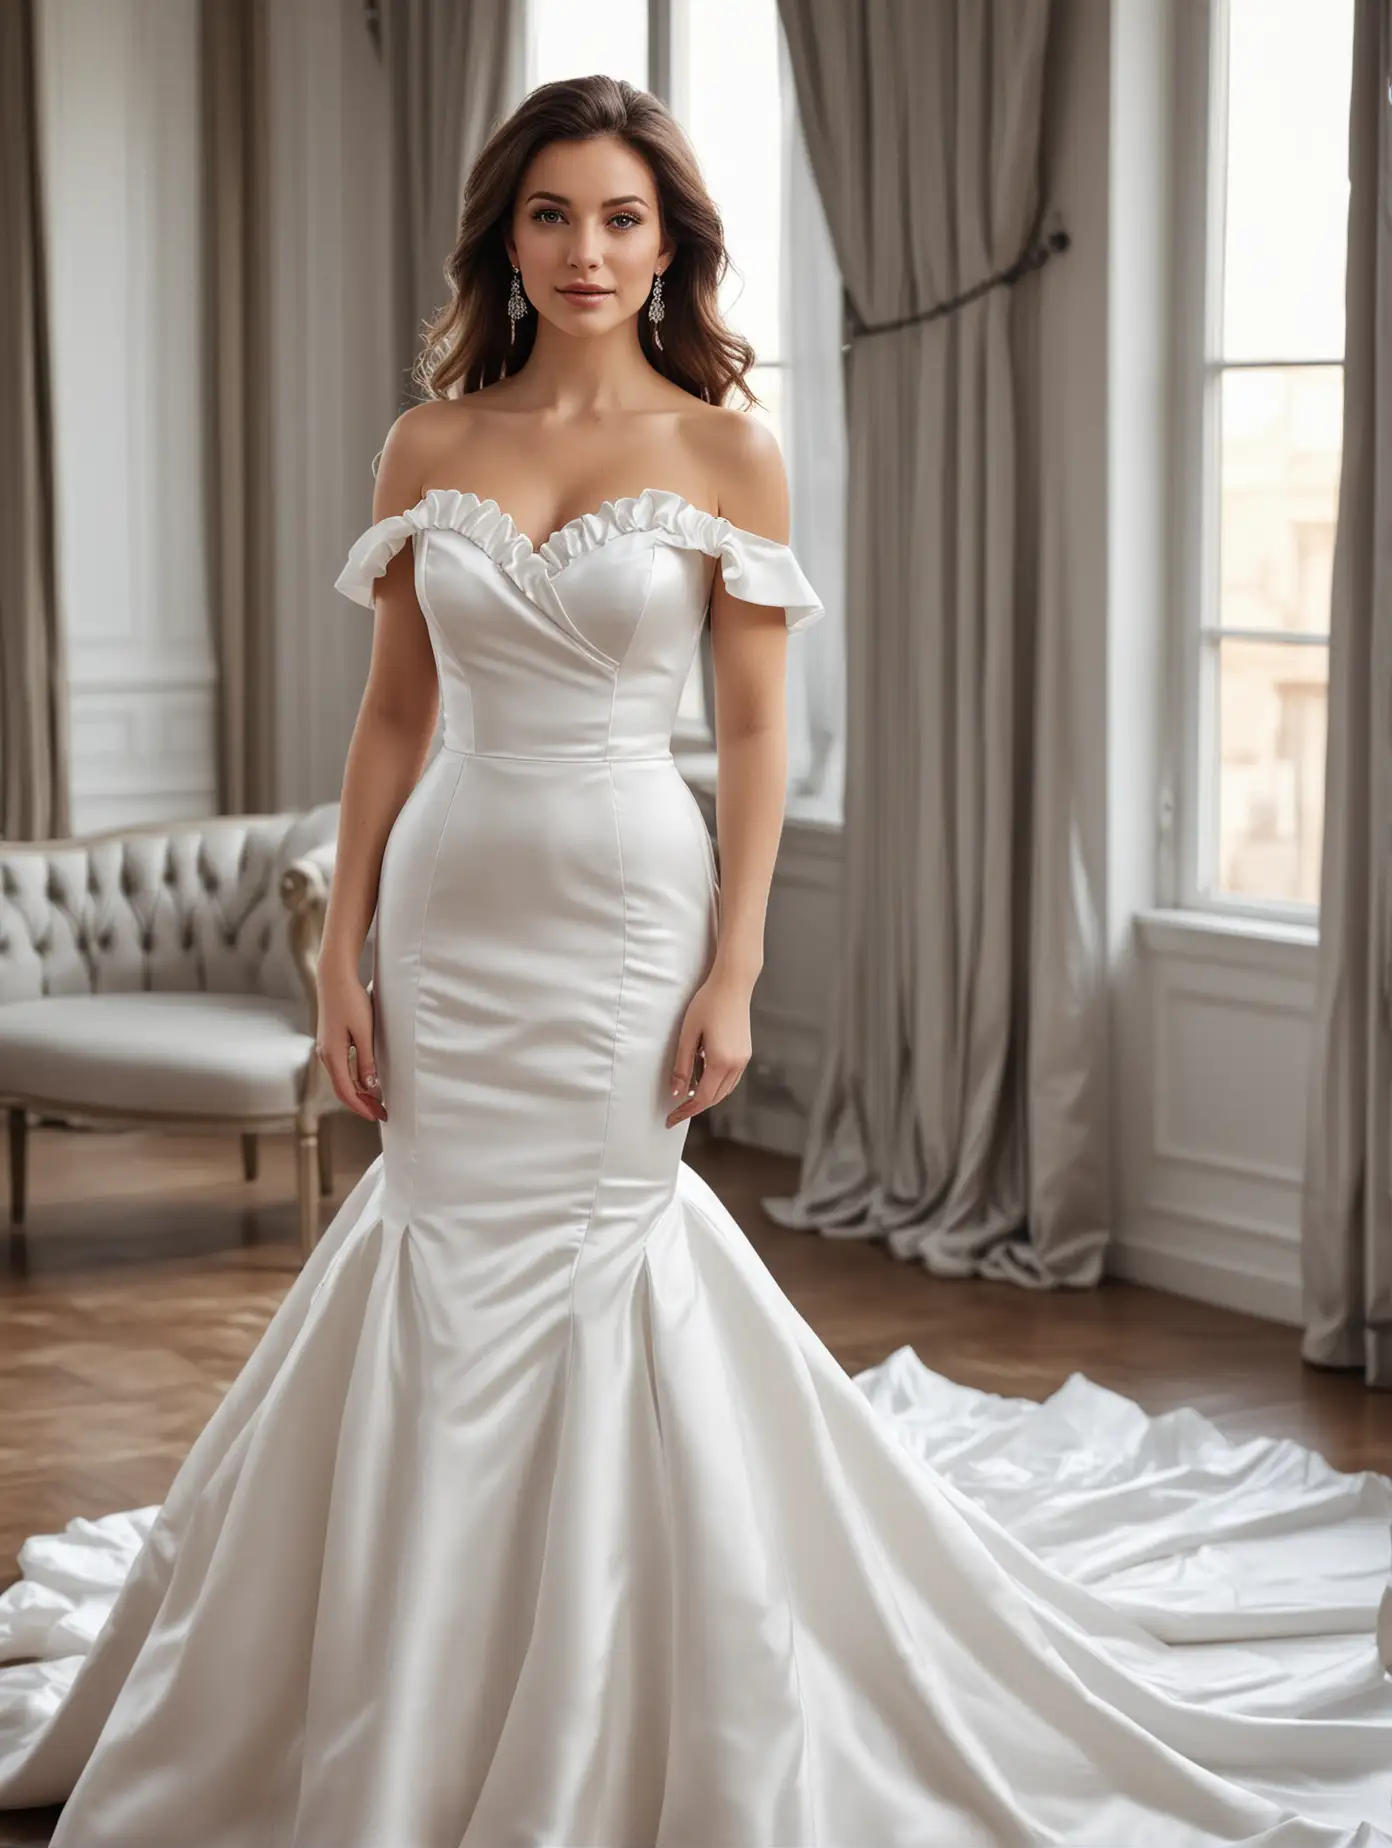 Caucasian woman, charming eyes, elegant off-shoulder mermaid white satin wedding dress with ruffles on the shoulders and train. Facing the camera, simple design, no wrinkles in the fabric. It features high-resolution photography with sharp facial features, just like a fashion magazine style photo shoot. Beautiful model in indoor environment with natural light